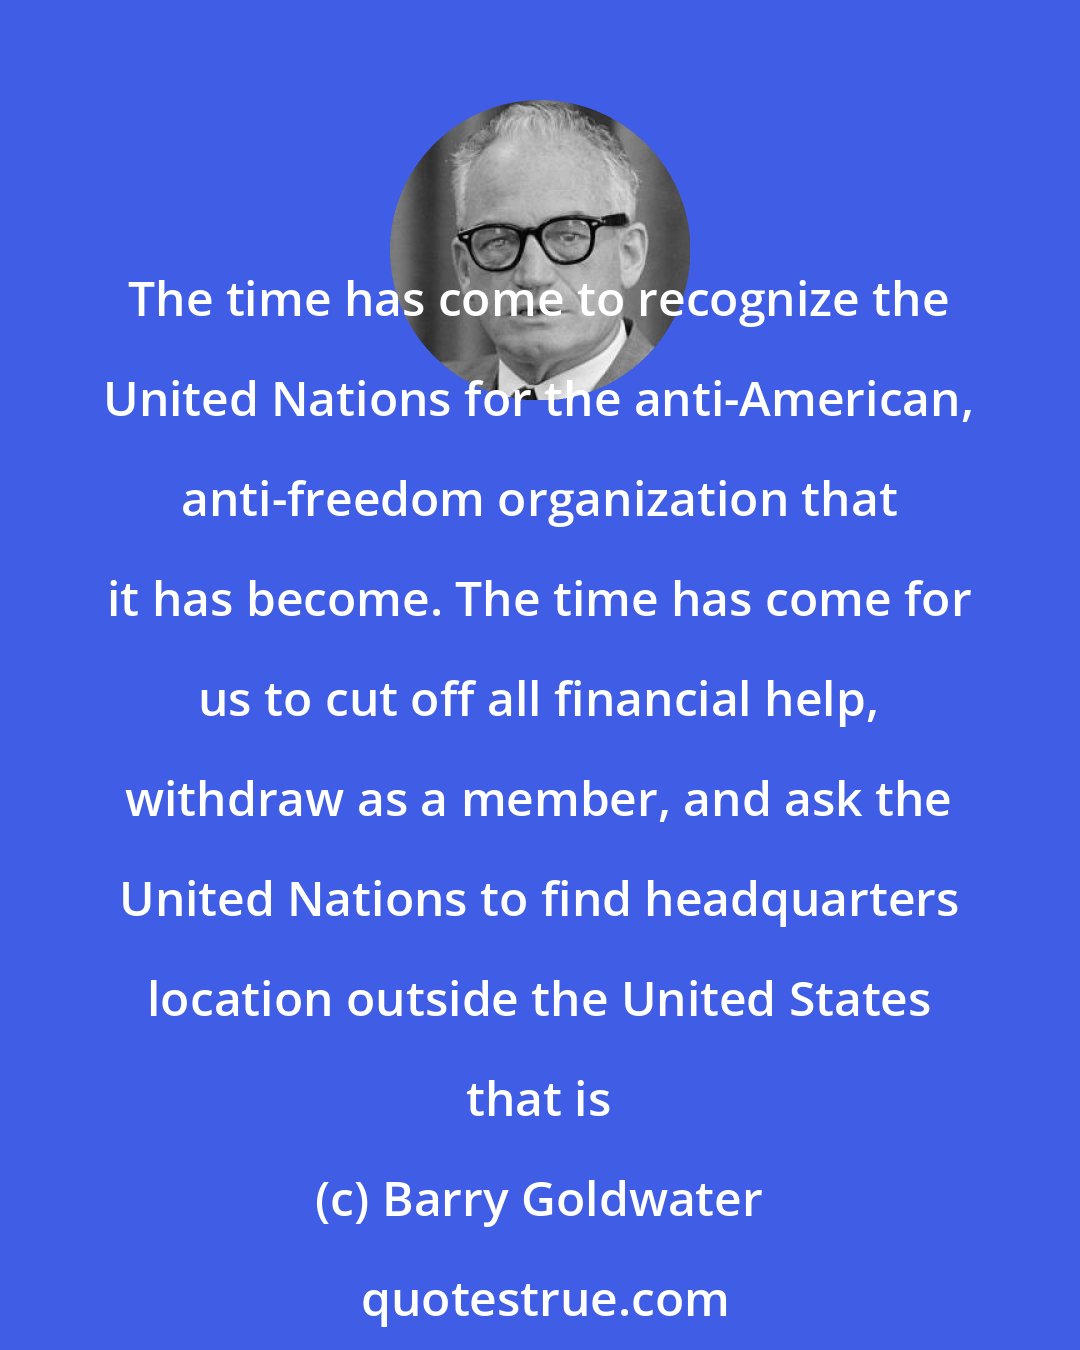 Barry Goldwater: The time has come to recognize the United Nations for the anti-American, anti-freedom organization that it has become. The time has come for us to cut off all financial help, withdraw as a member, and ask the United Nations to find headquarters location outside the United States that is